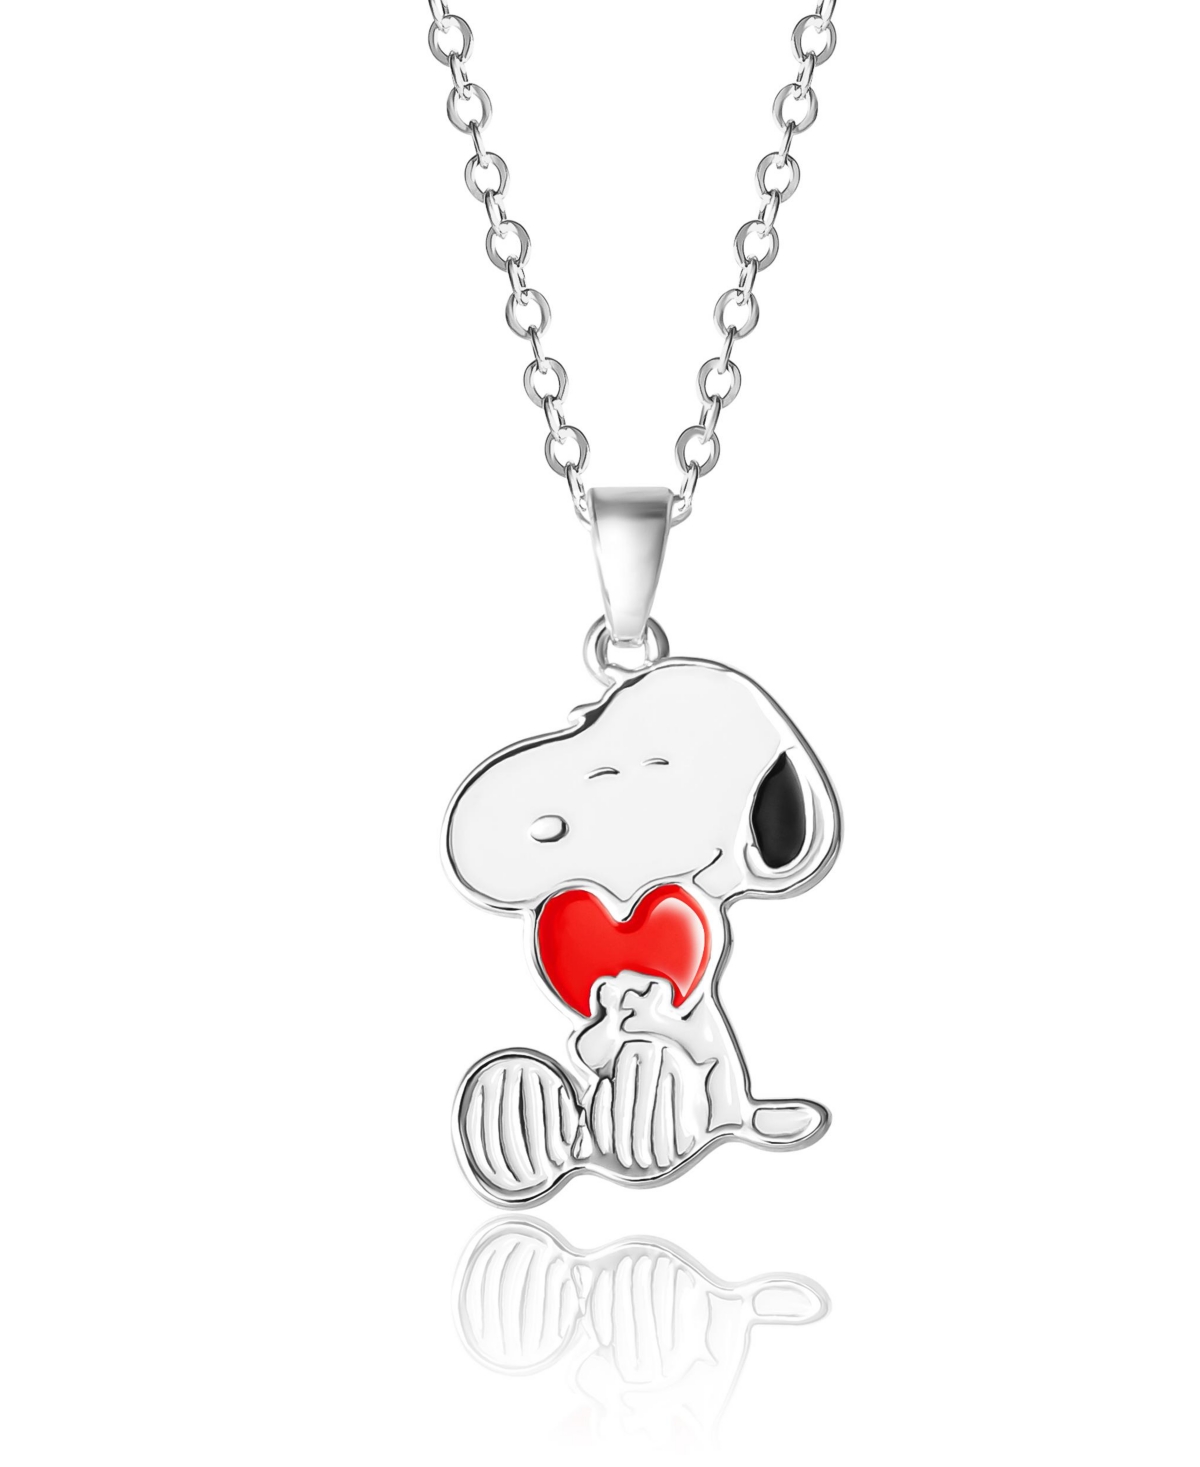 Snoopy Silver Plated Holding Heart Pendant, 16+2" Chain - Silver tone, white, red